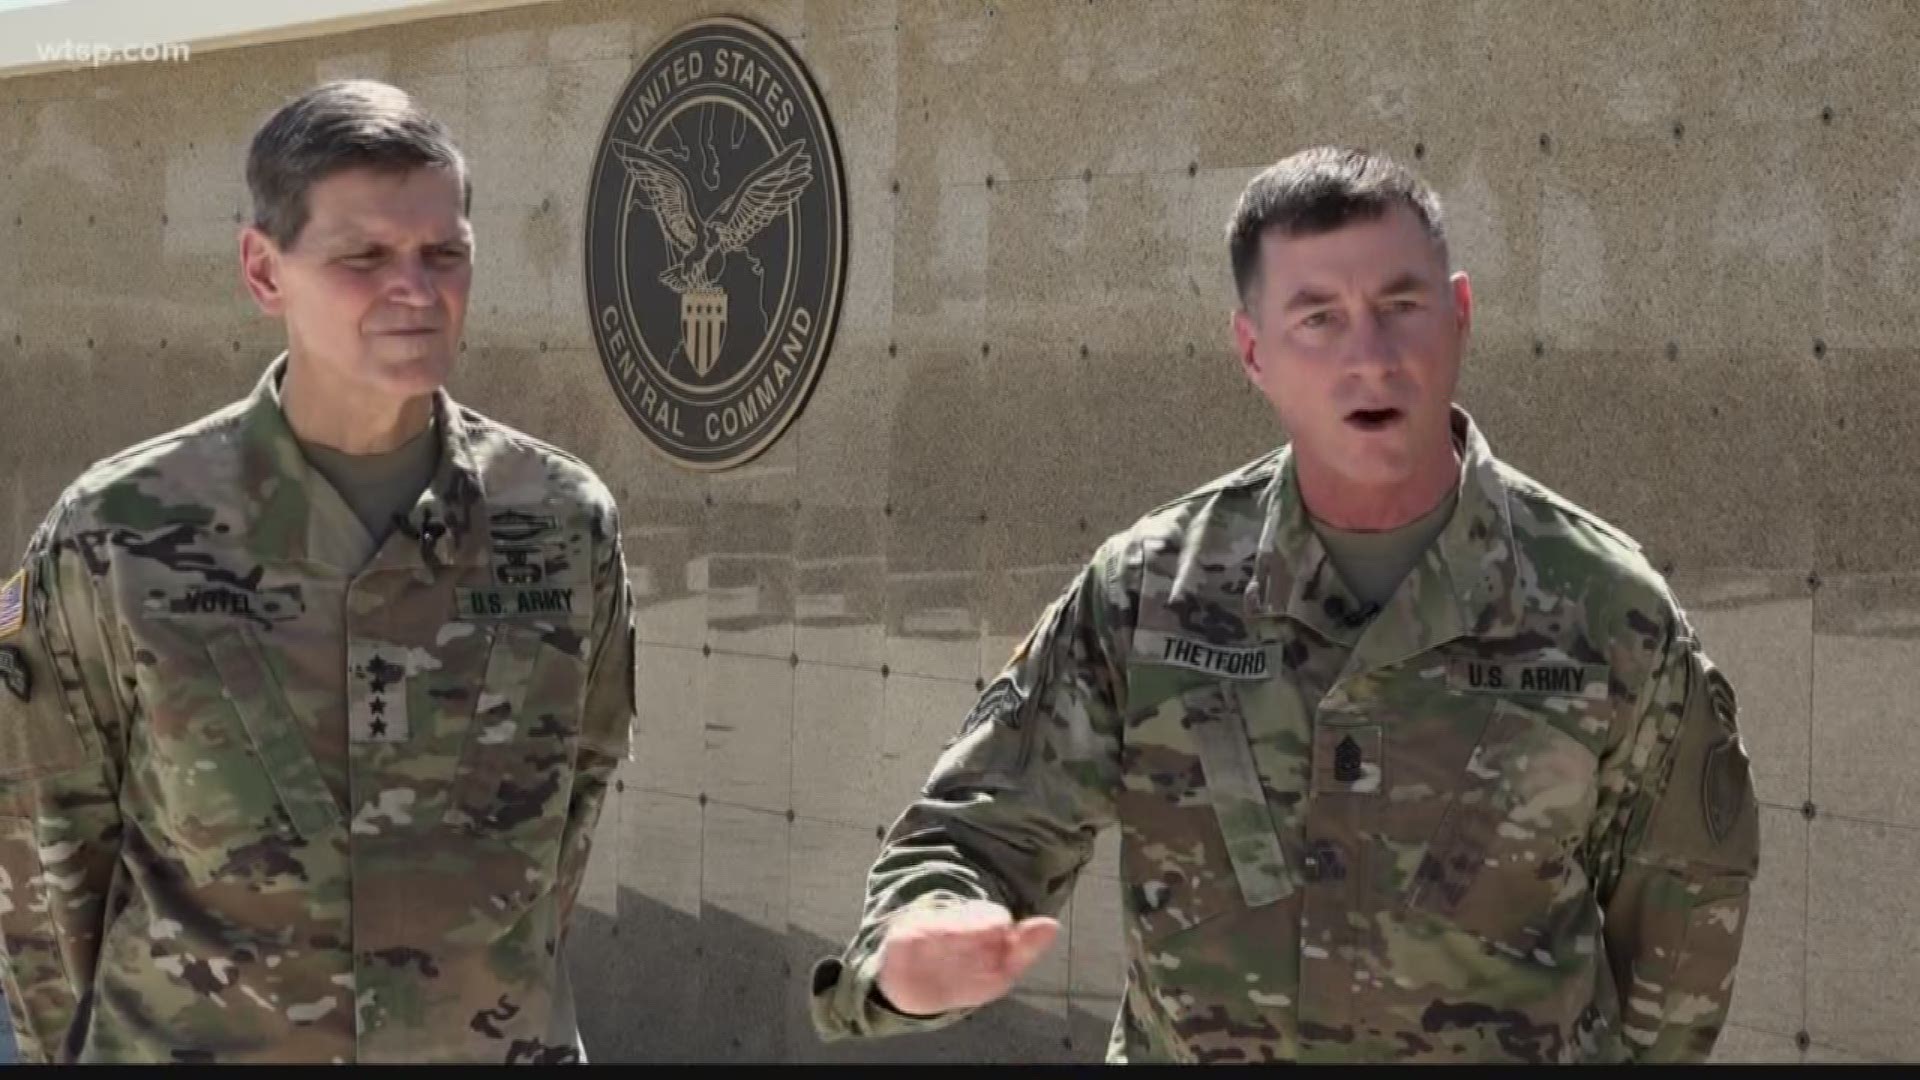 Outgoing CENTCOM commander General Joseph Votel and his command sergeant major, Bill Thetford, discussed bringing women into special operations forces.